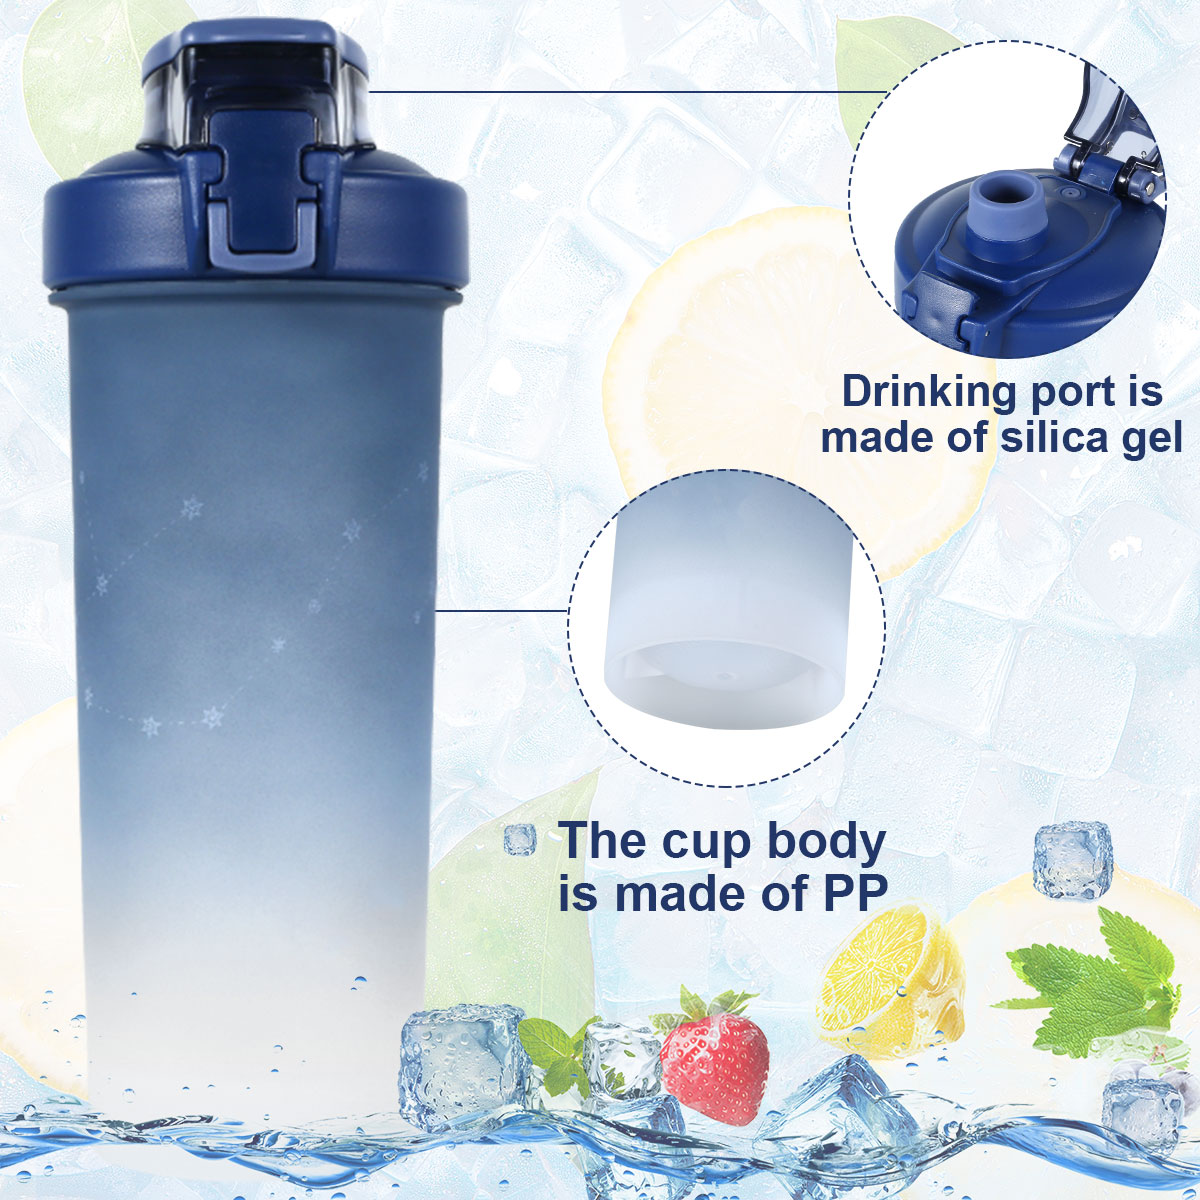 Pcapzz 800ml Shaker Bottle,Plastic and Silicone Shaker Cup with